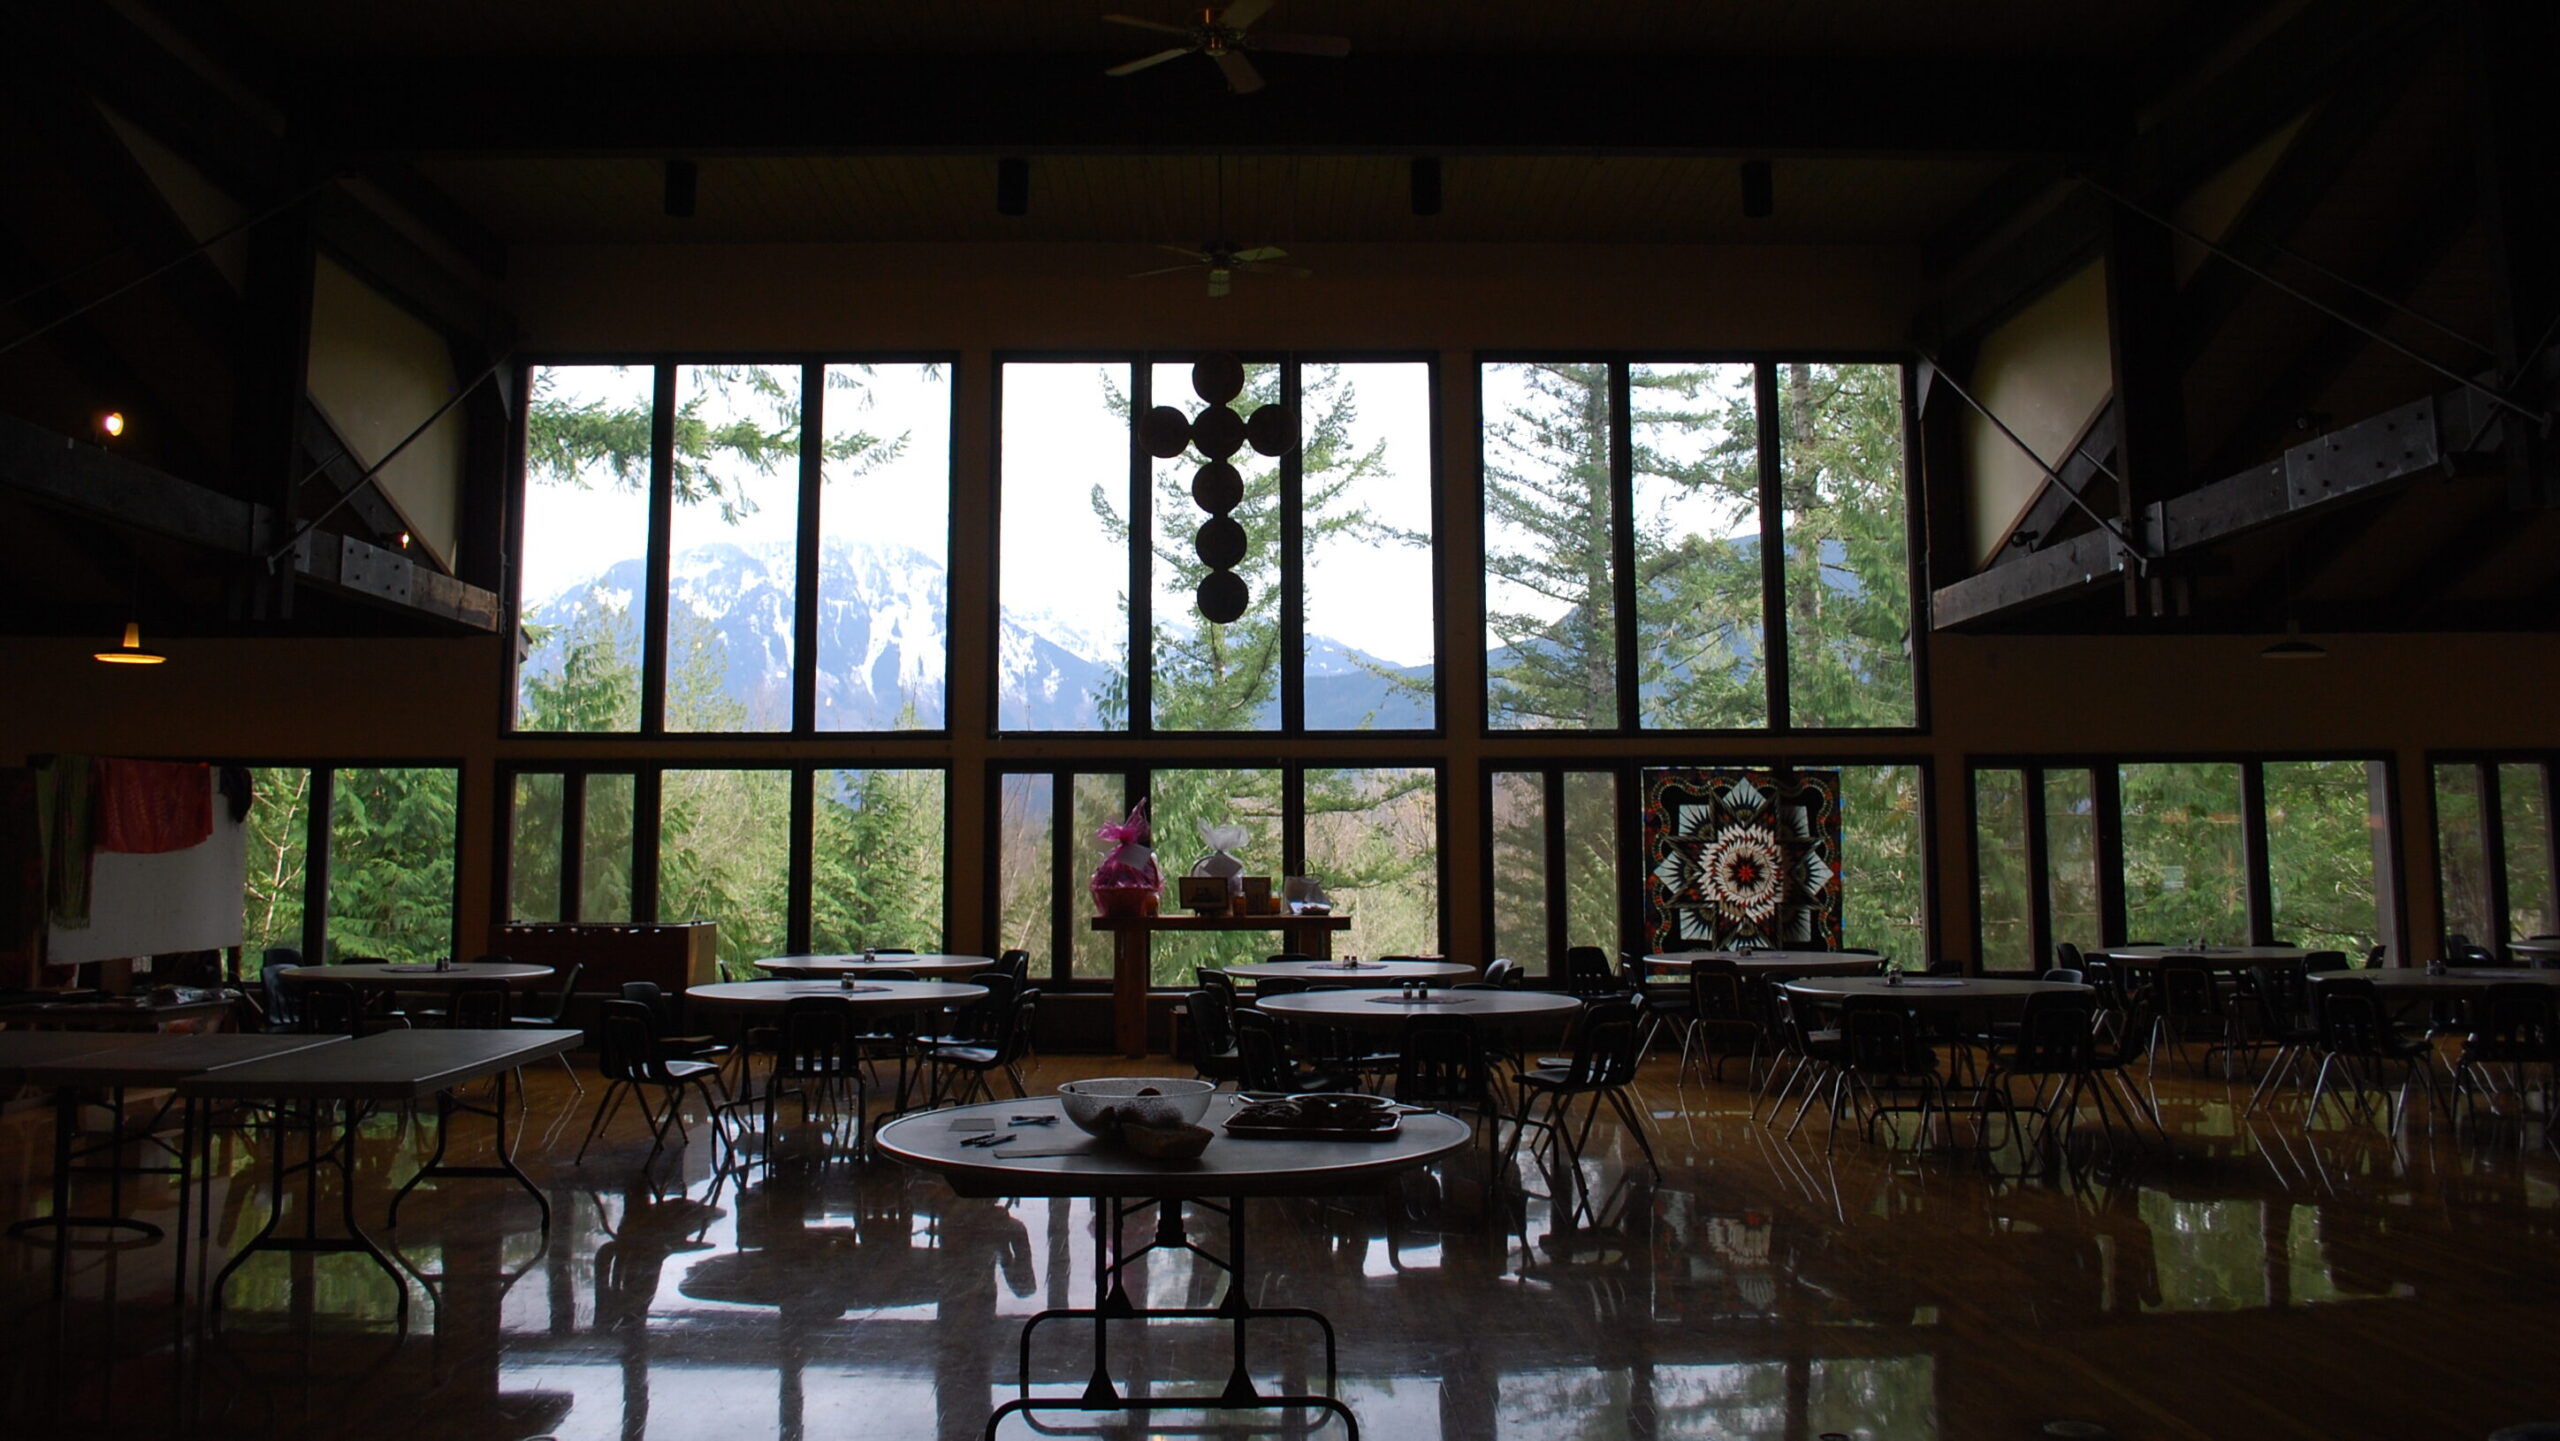 A contrasted shot of the dining hall, highlighting the mountain outside and the colorful quilt hanging in the window